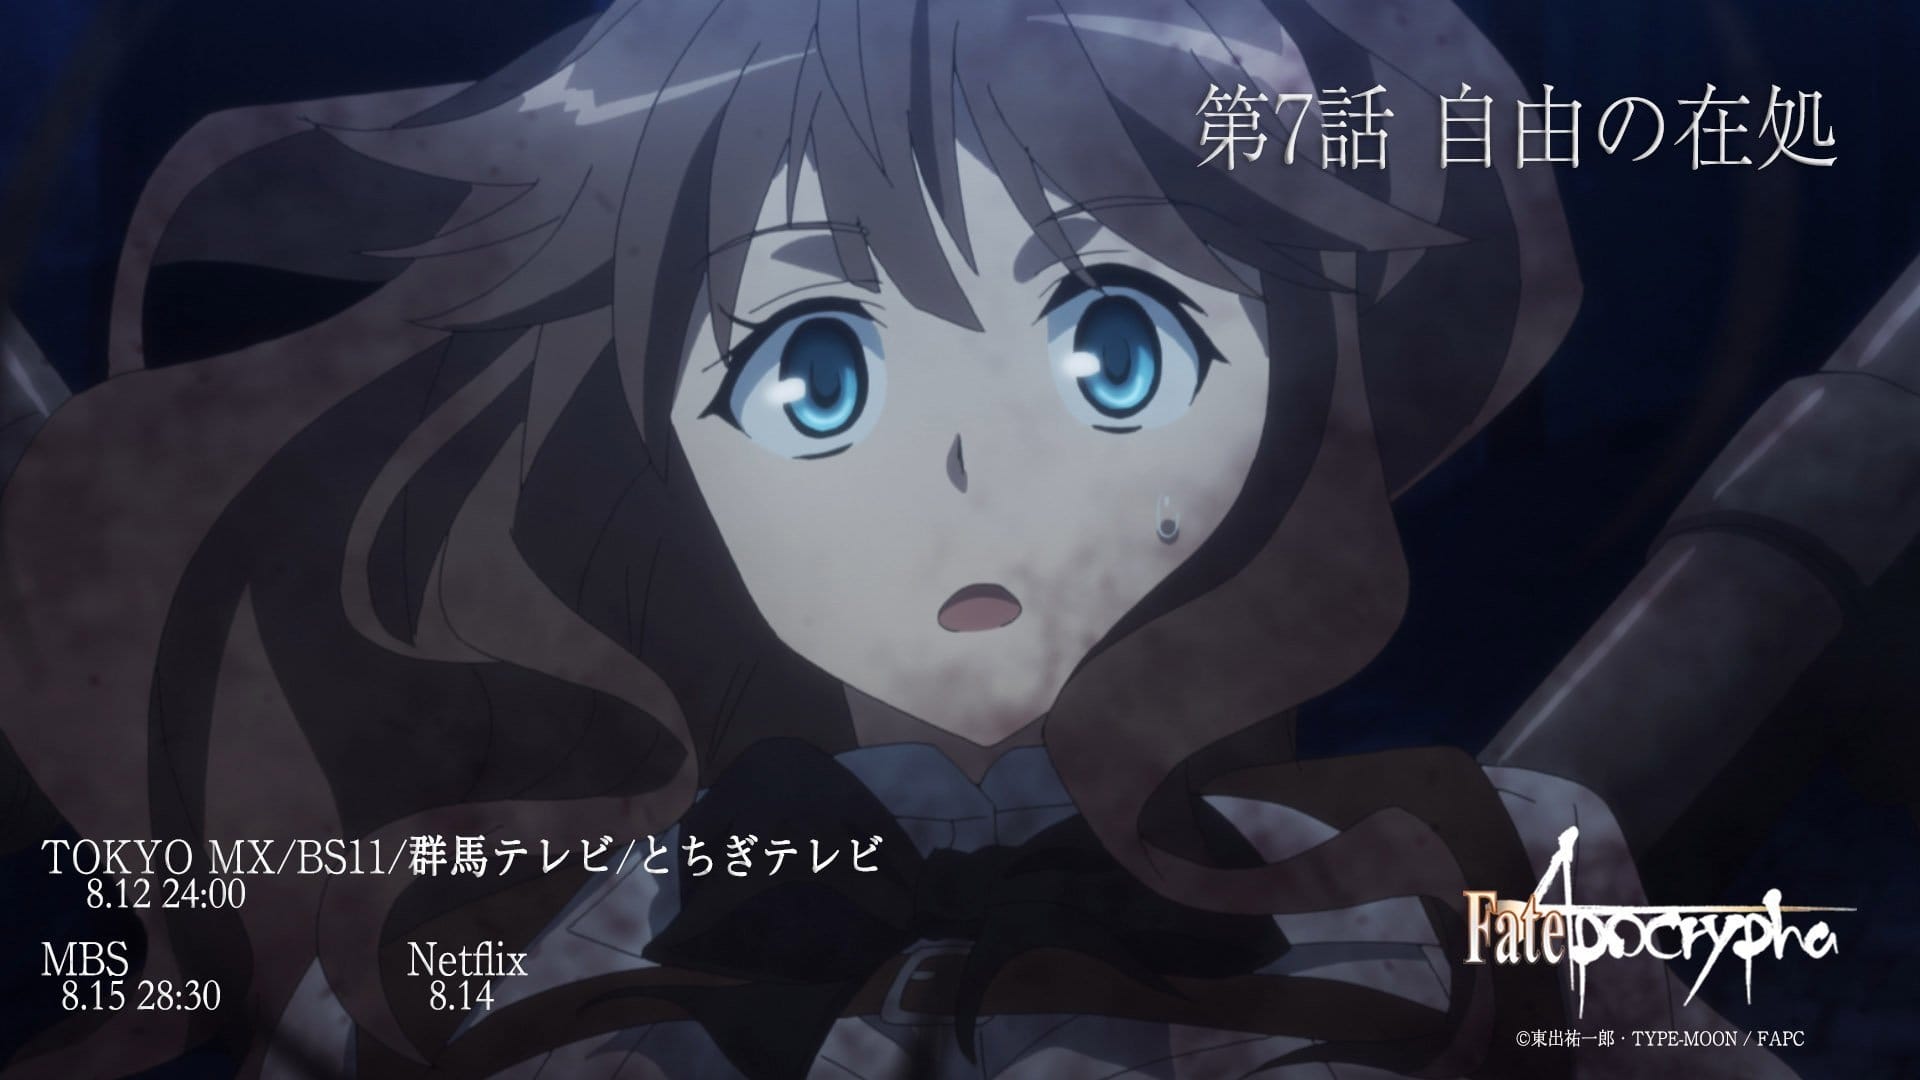 Watch Fate Apocrypha Episode 7 Online